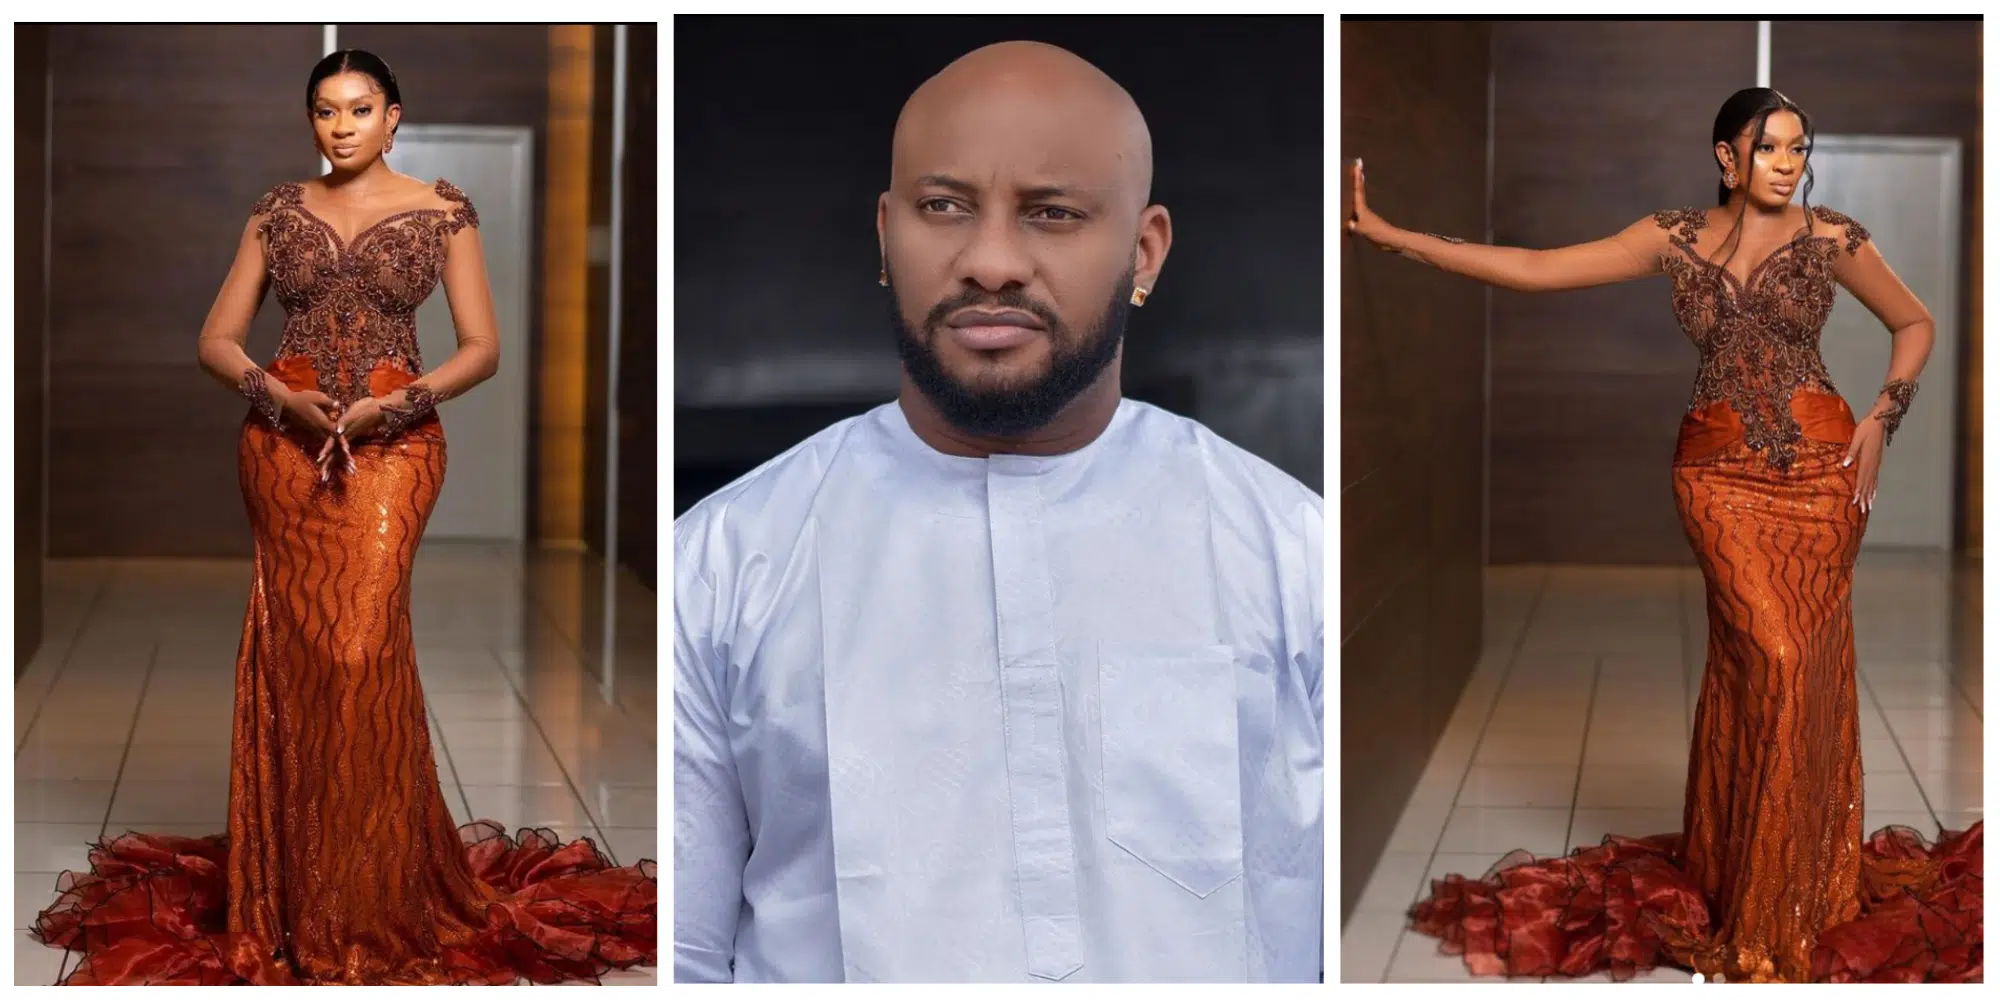 ‘In 2023 You Had Time To Do Breast Enlargement Surgery, Tummy Tuck Without My Consent’ – Yul Edochie Blasts May